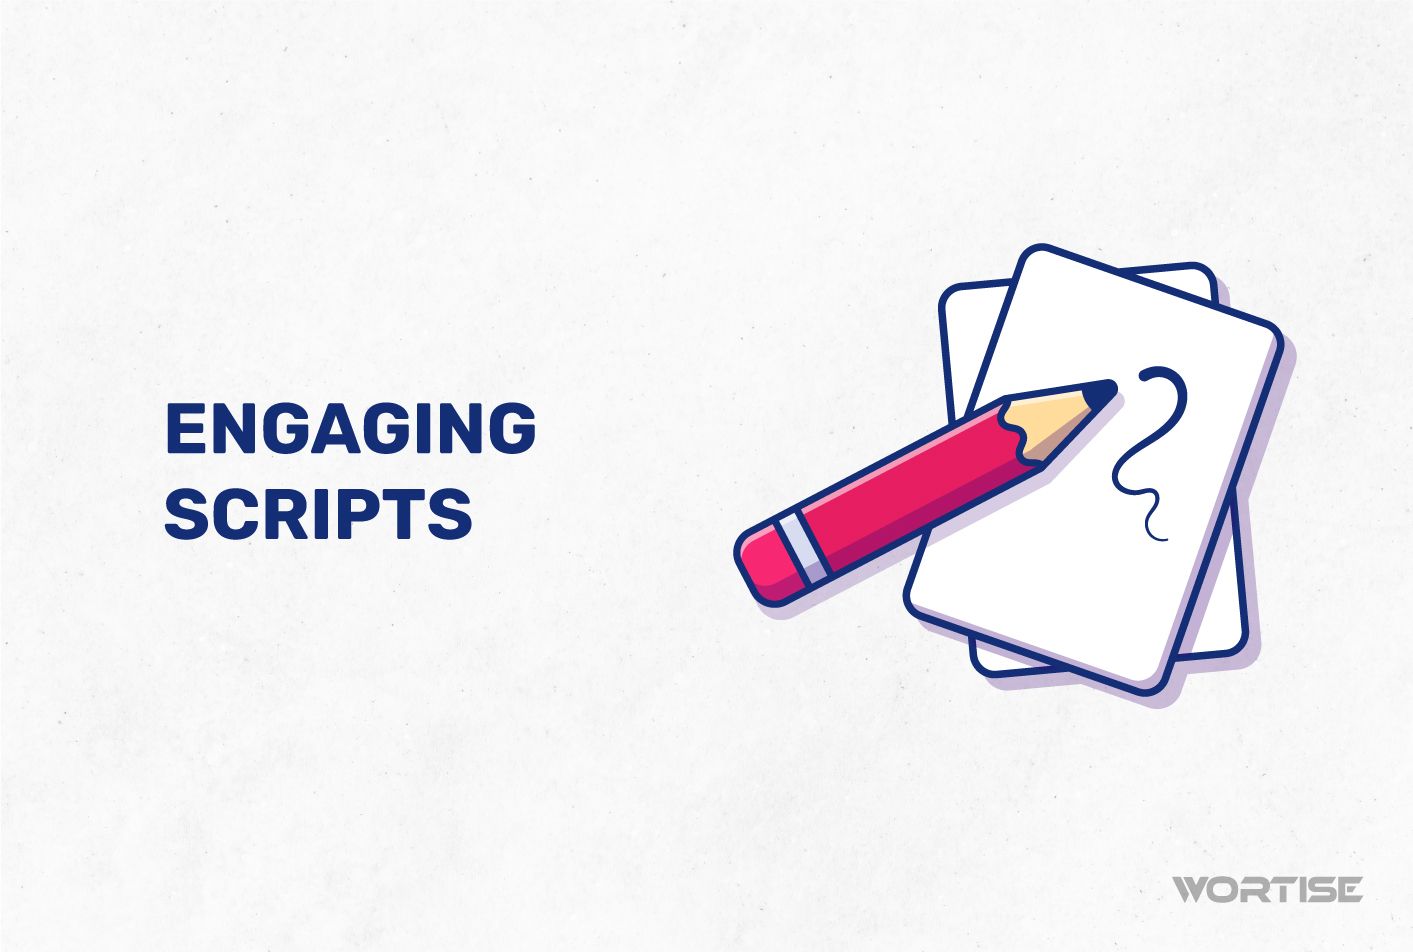 How to Write an Engaging Script for Your App Ads